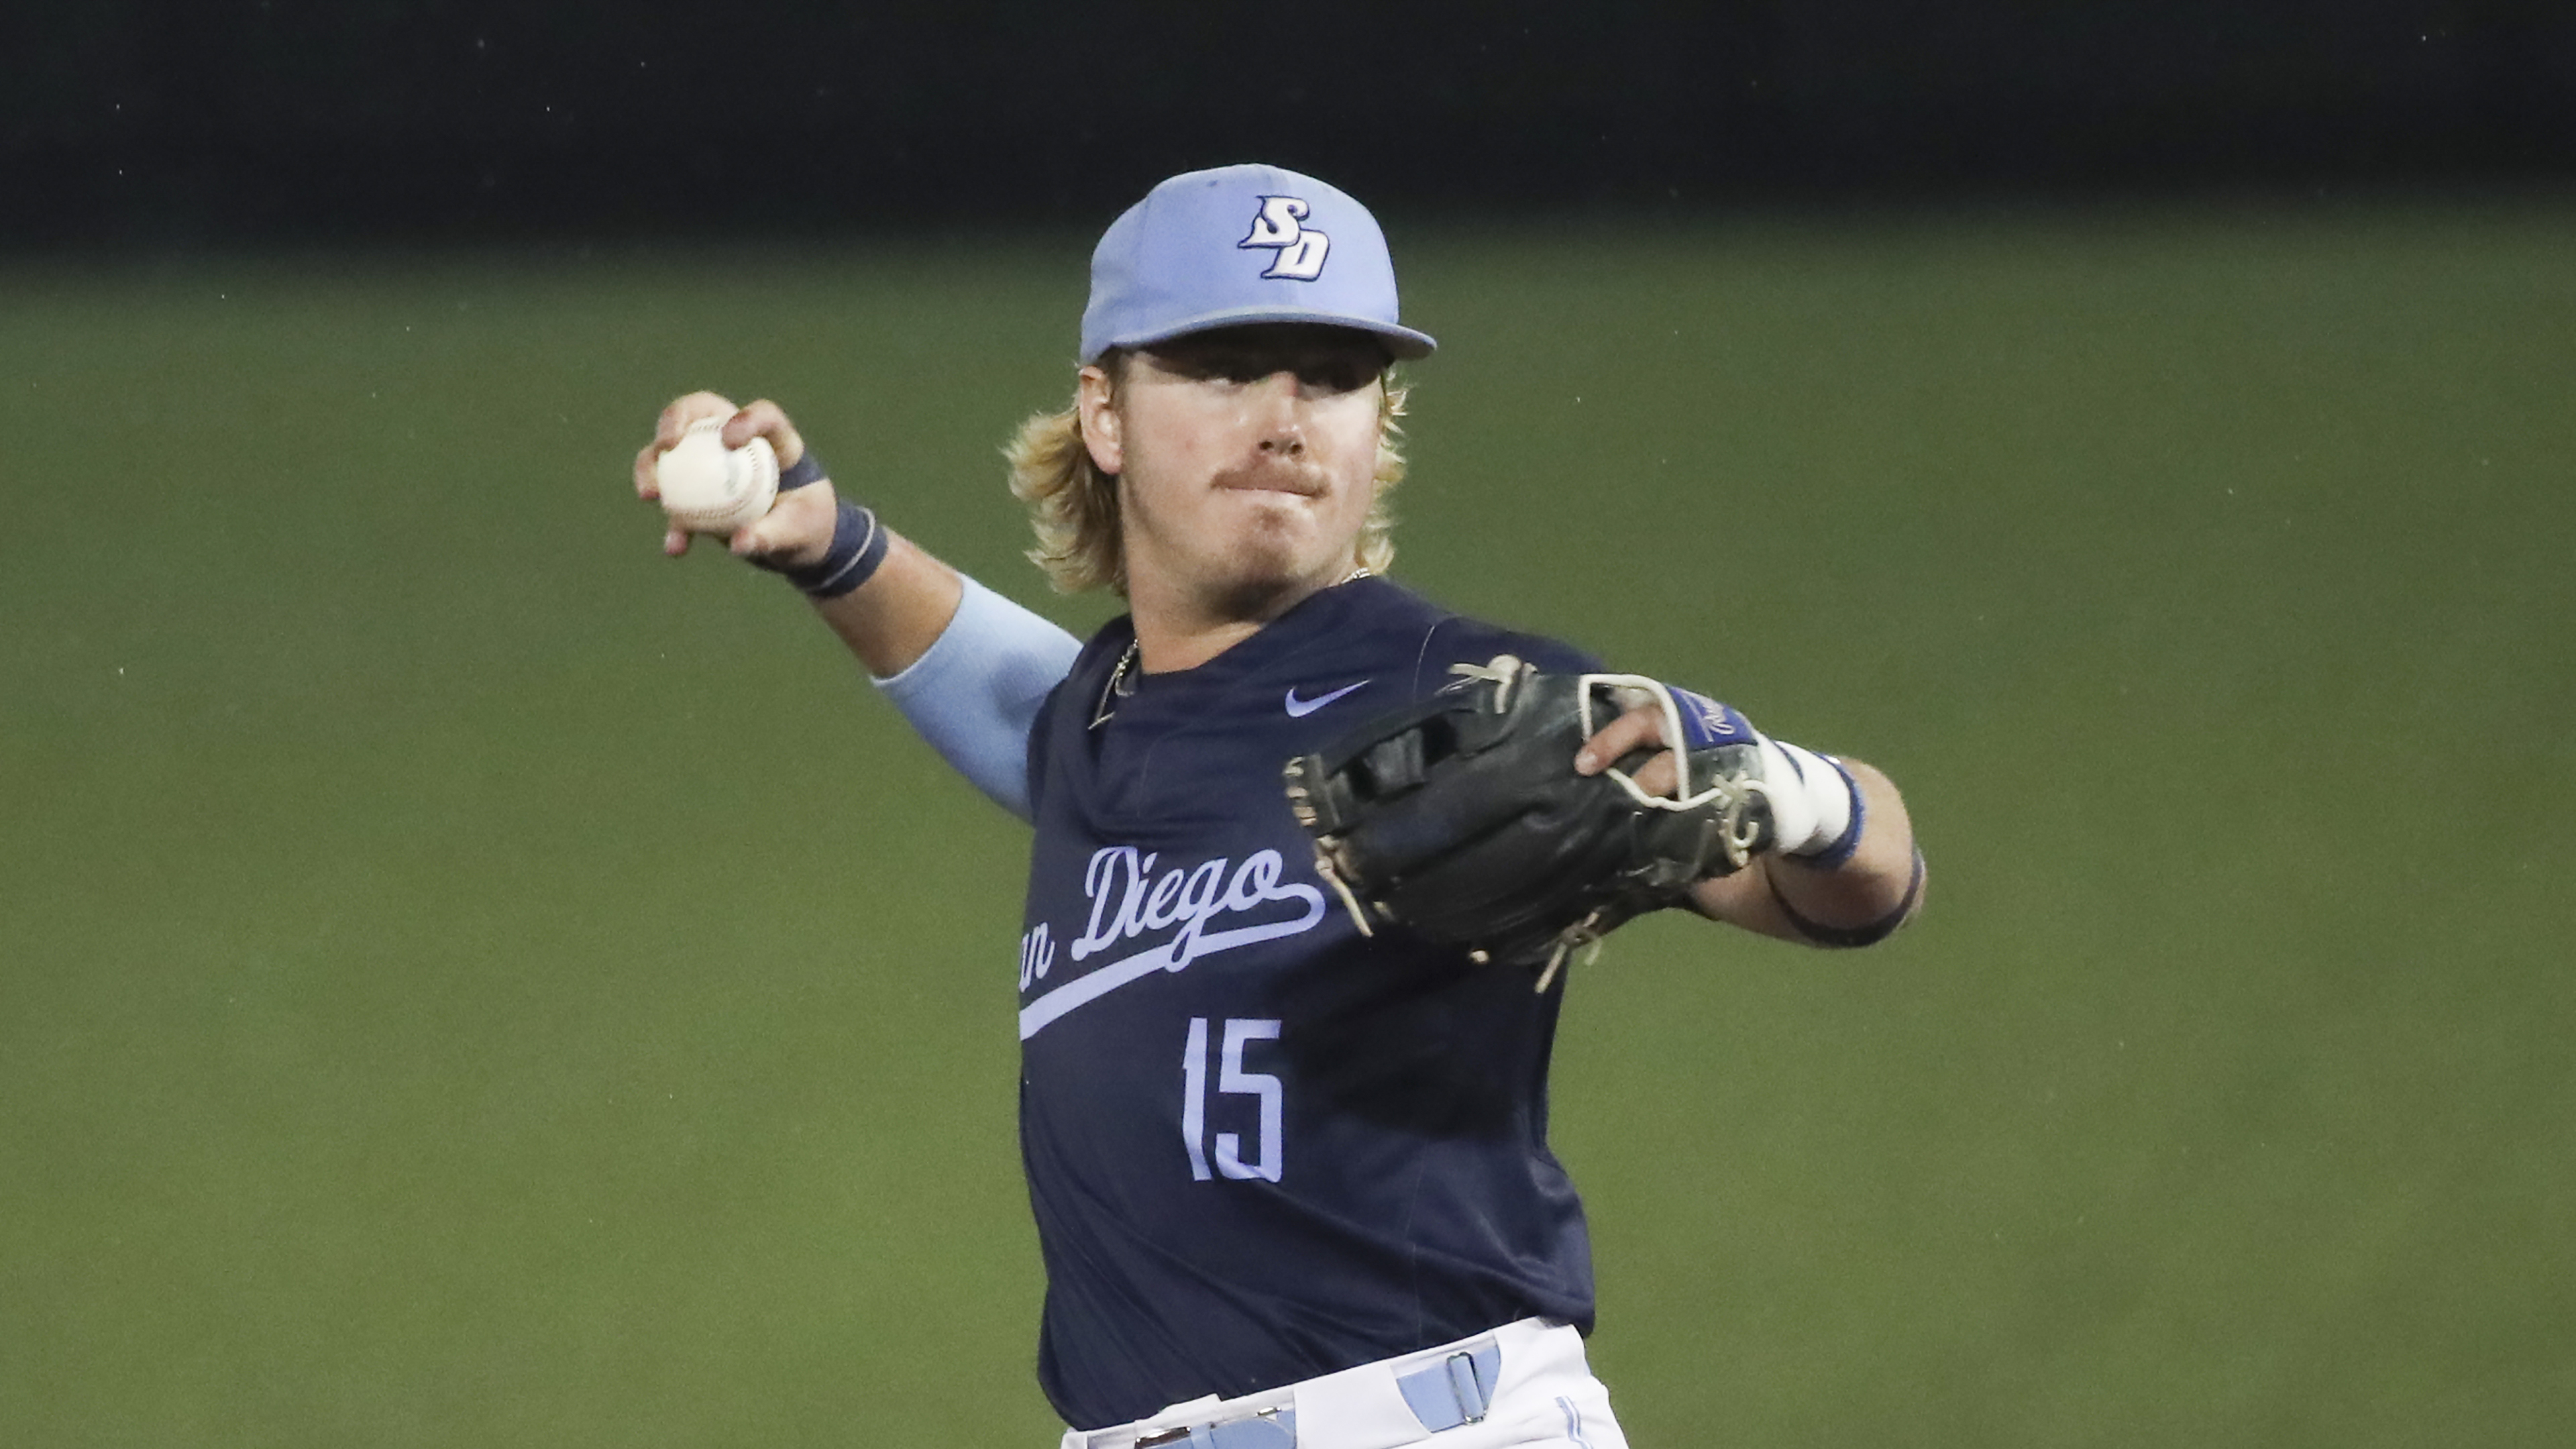 UNC Baseball commit Brooks Brannon selected by Boston Red Sox in MLB Draft  - Tar Heel Times - 7/19/2022